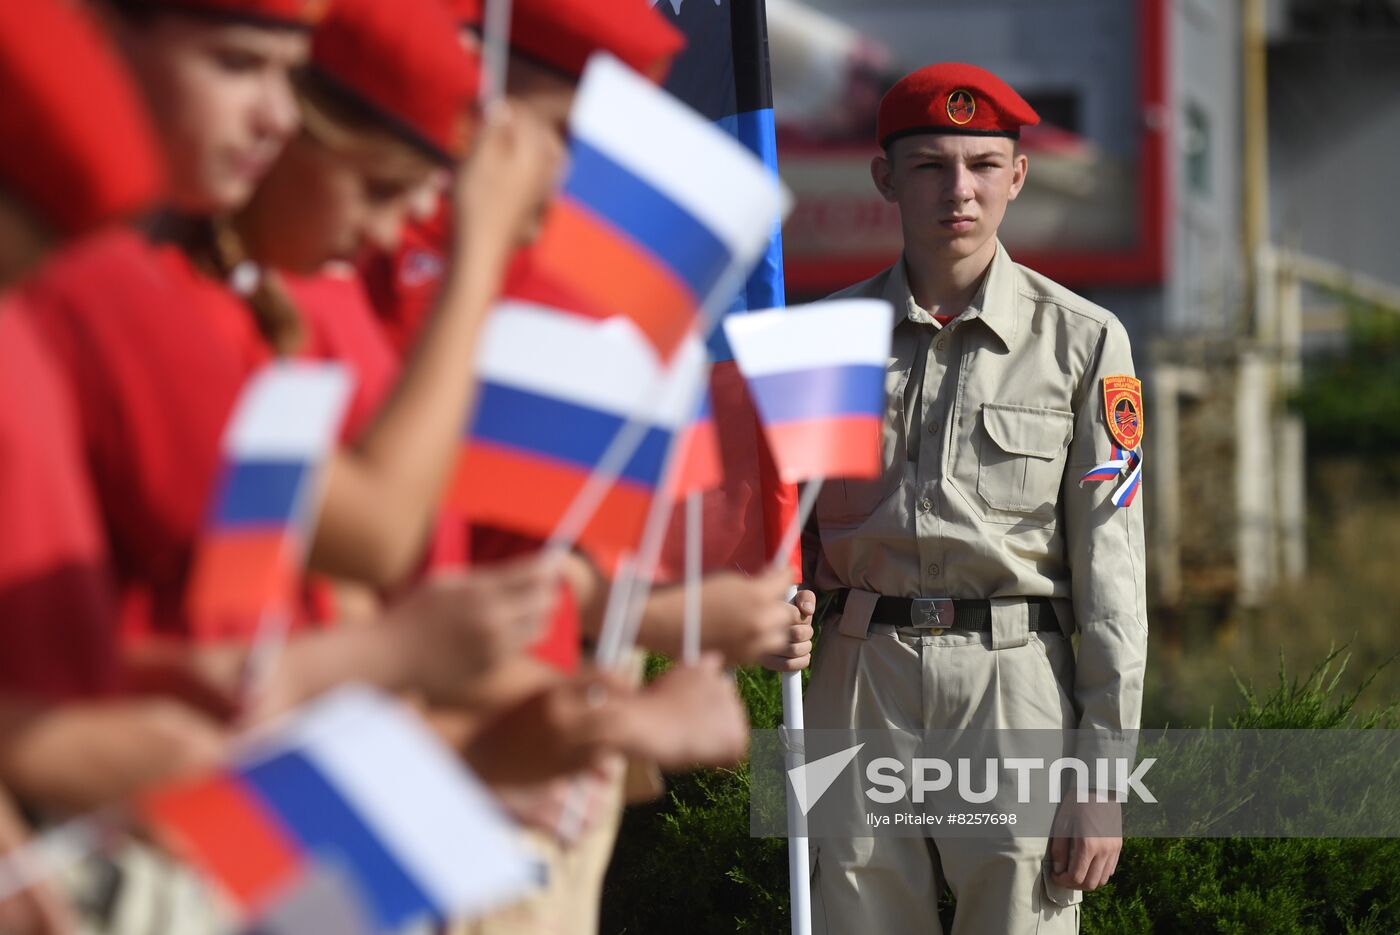 DPR Russia National Flag Day